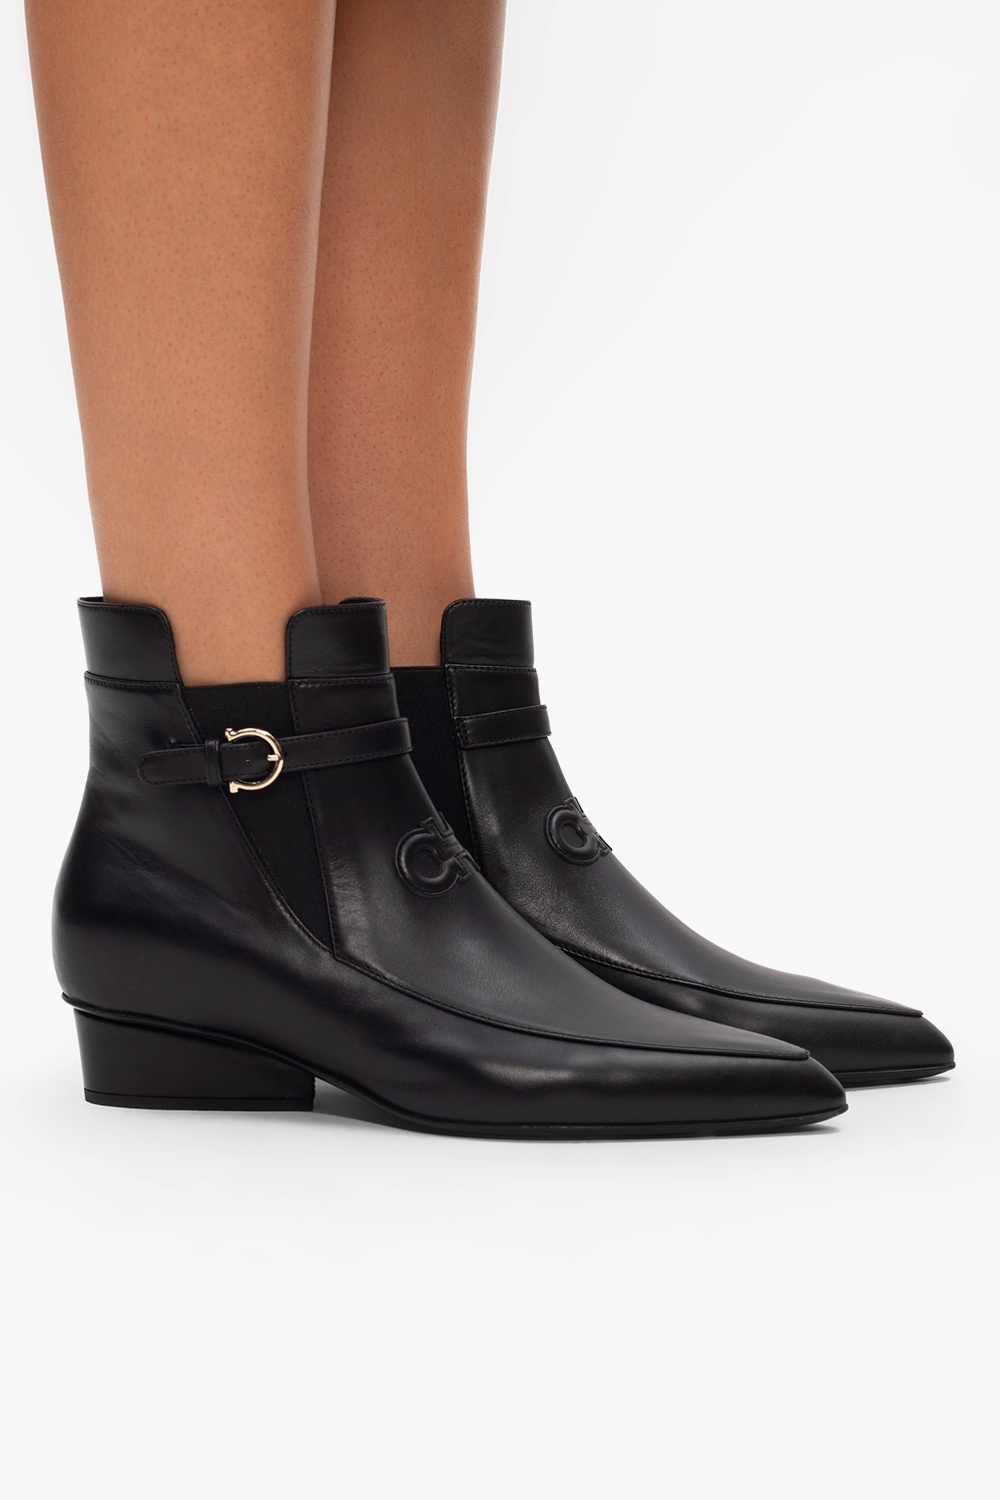 Salvatore Ferragamo 'Mineo' heeled ankle boots | Women's Shoes 